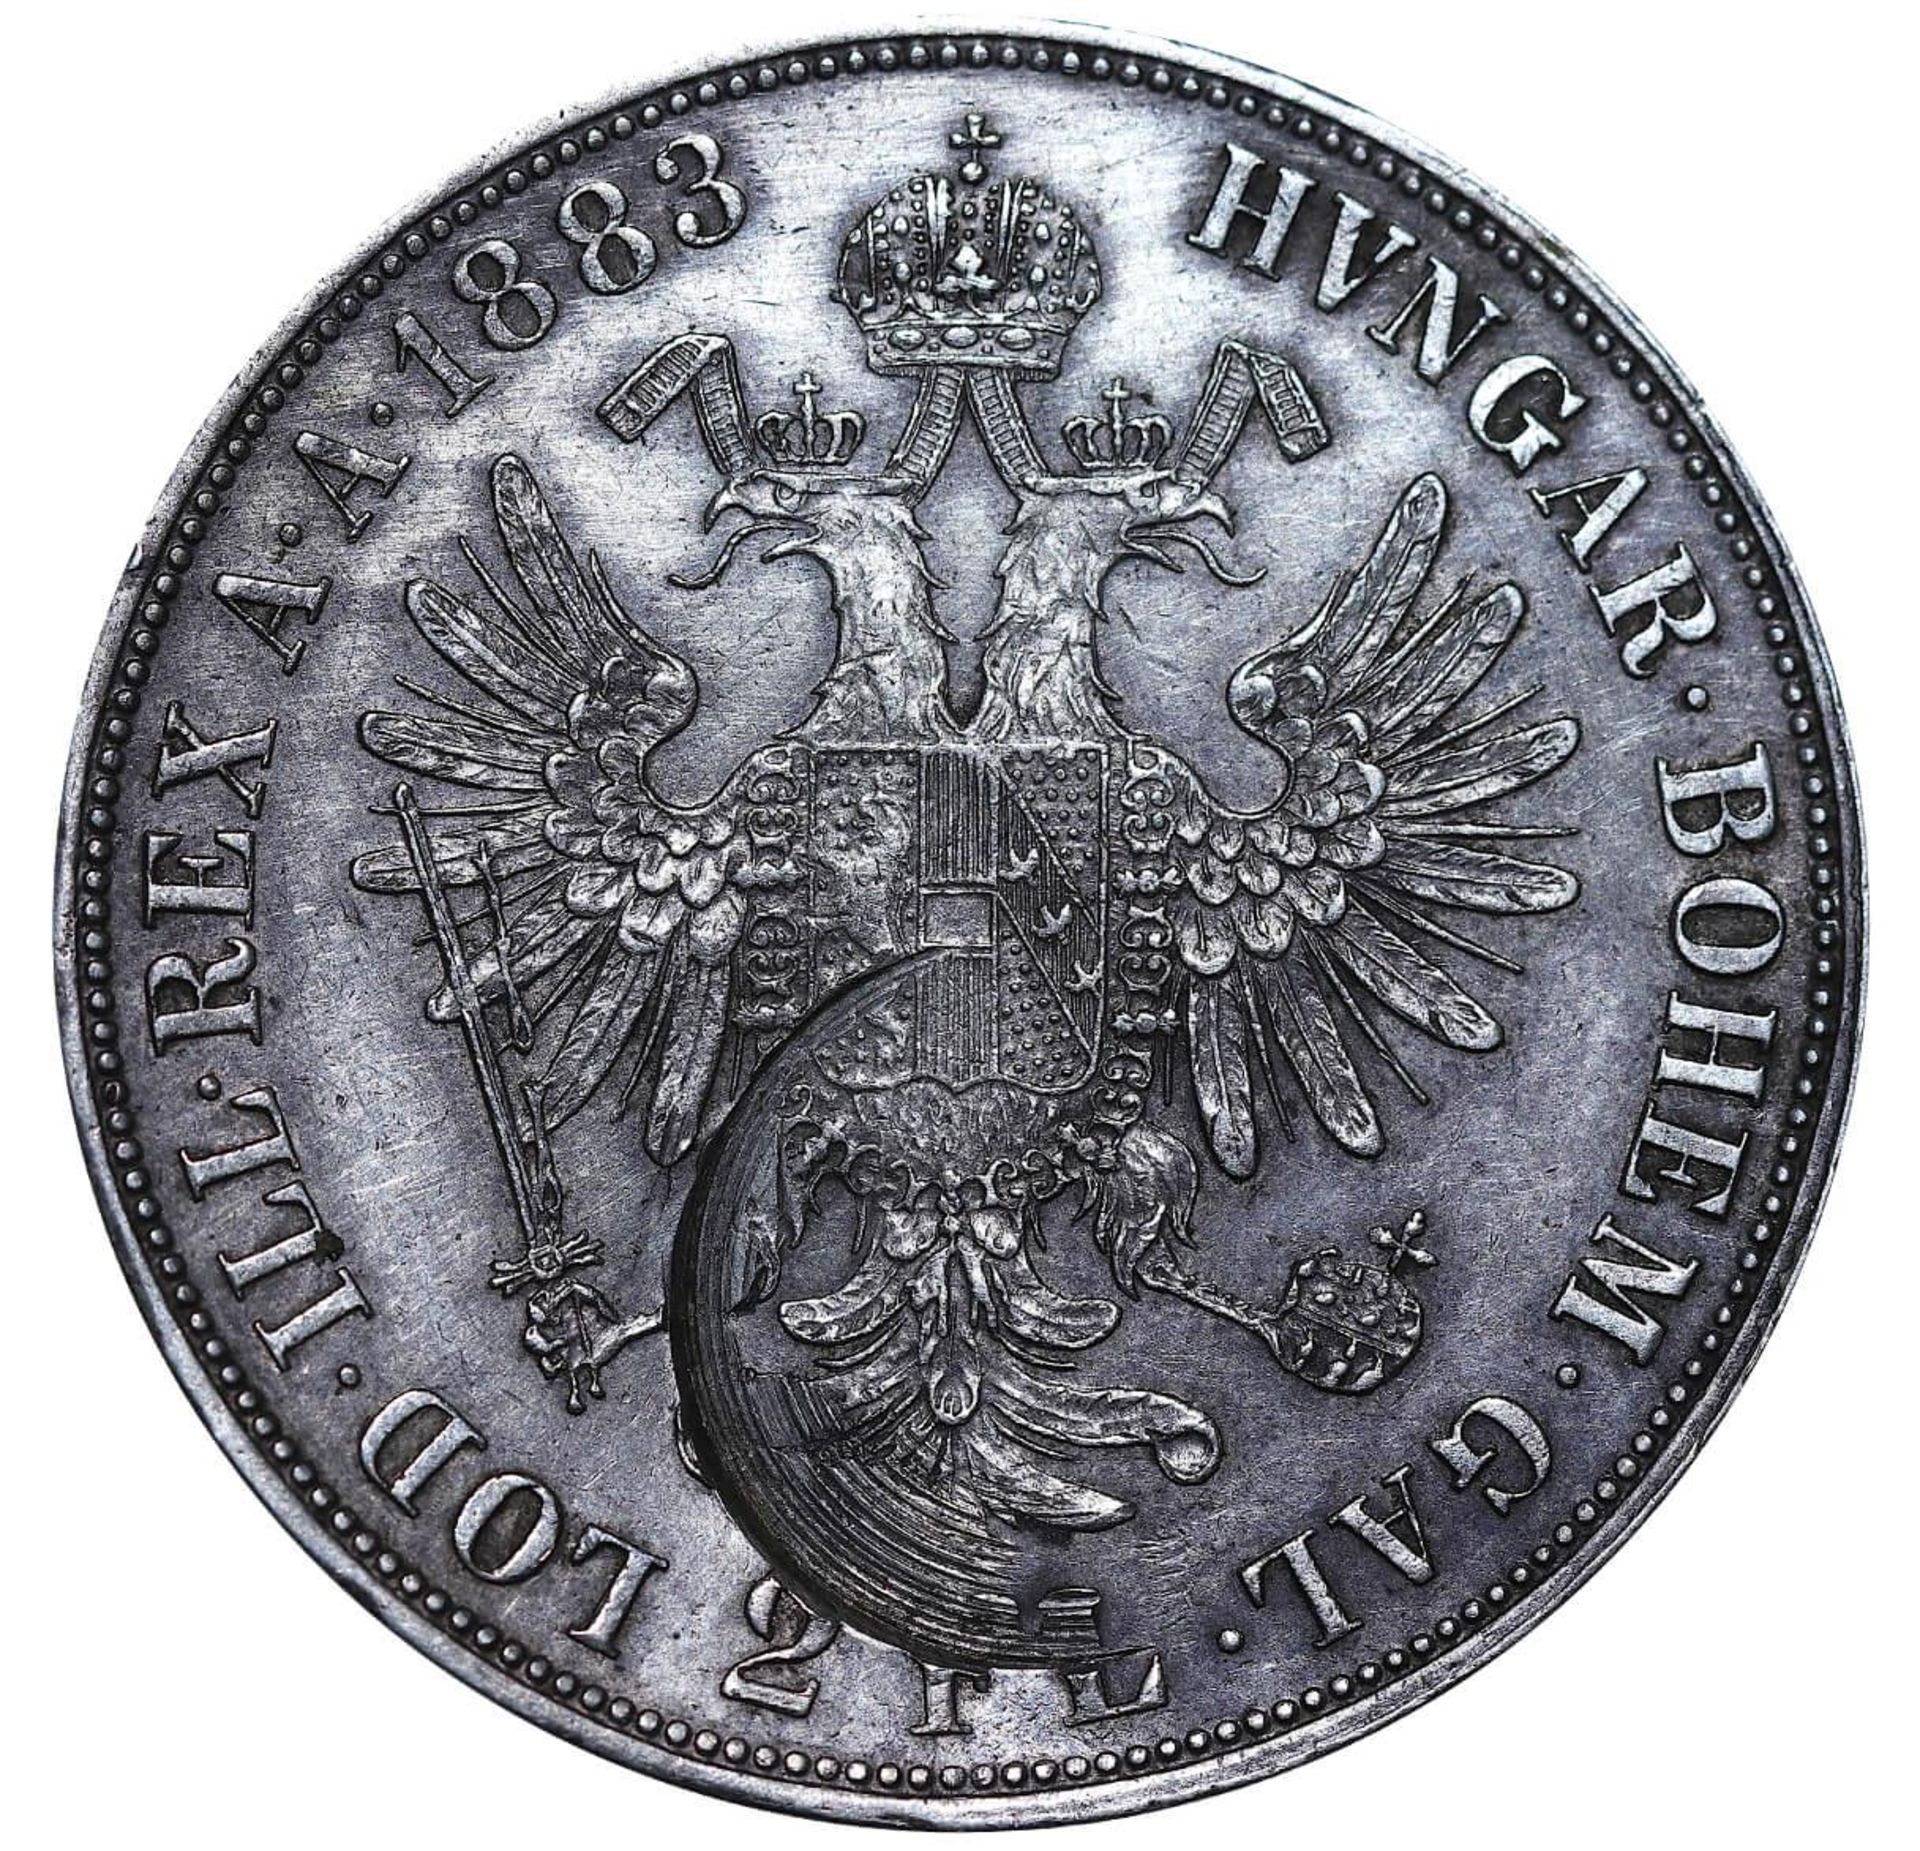 Austria, 2 Florin, 1883 year - Image 3 of 3